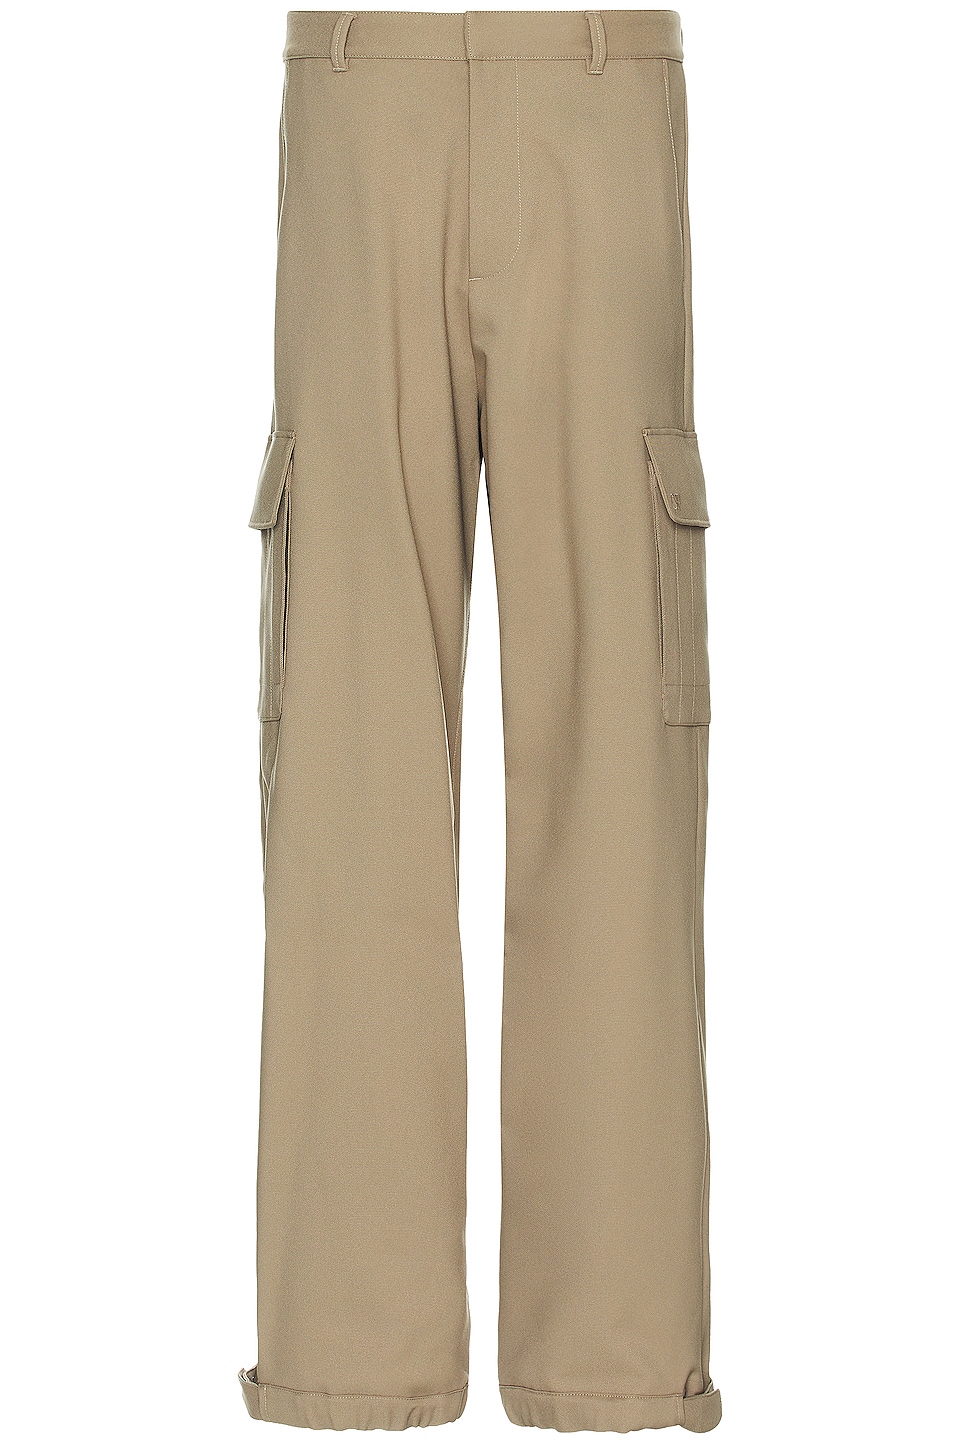 Image 1 of OFF-WHITE Drill Cargo Pant in Beige